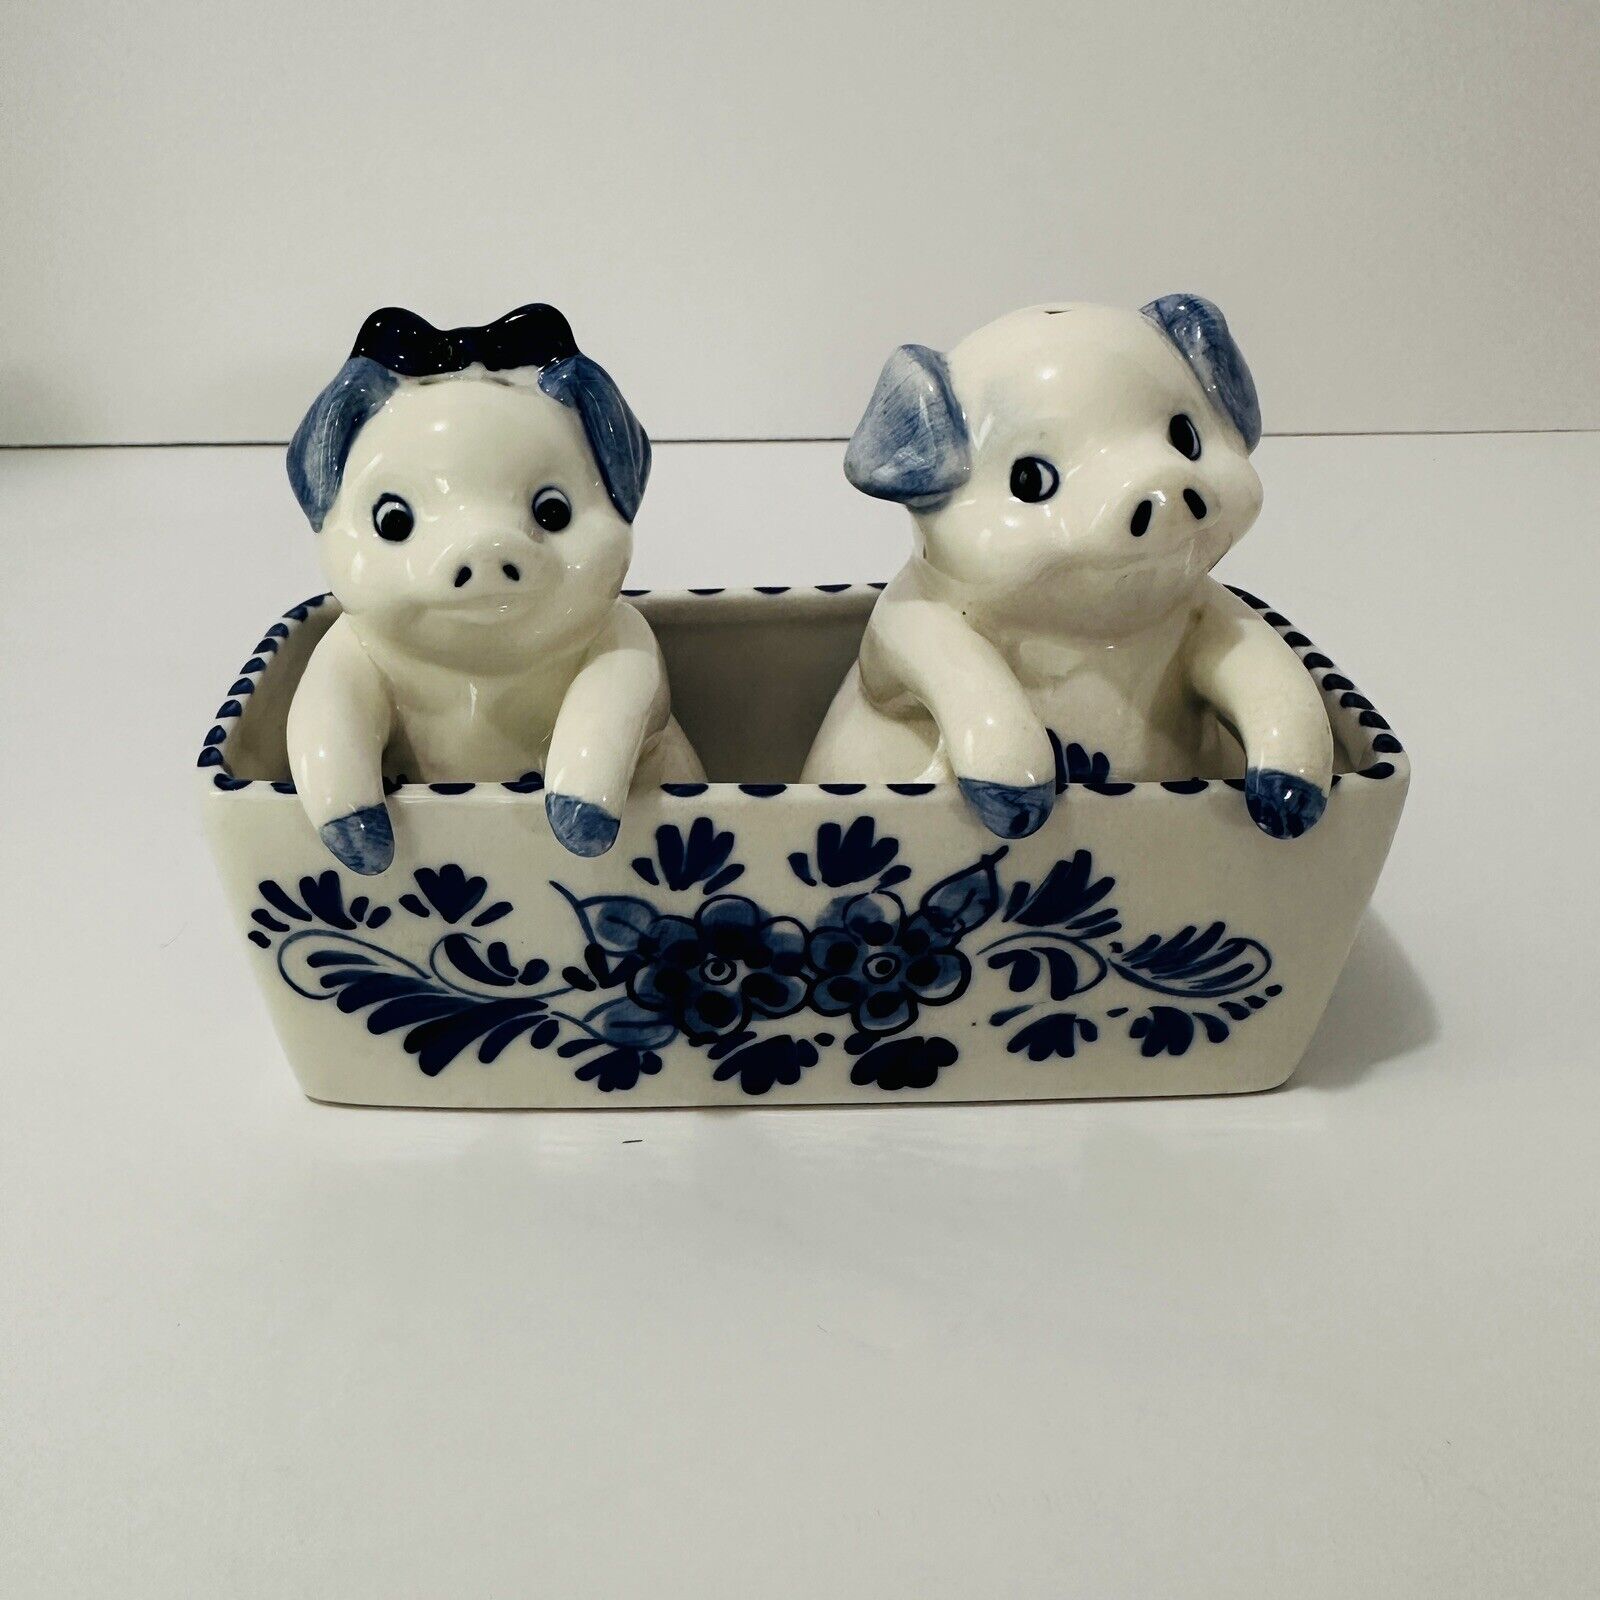 Vintage Delft Blue Salt & Pepper Shakers (3 Piece) Pigs in Trough Hand Painted